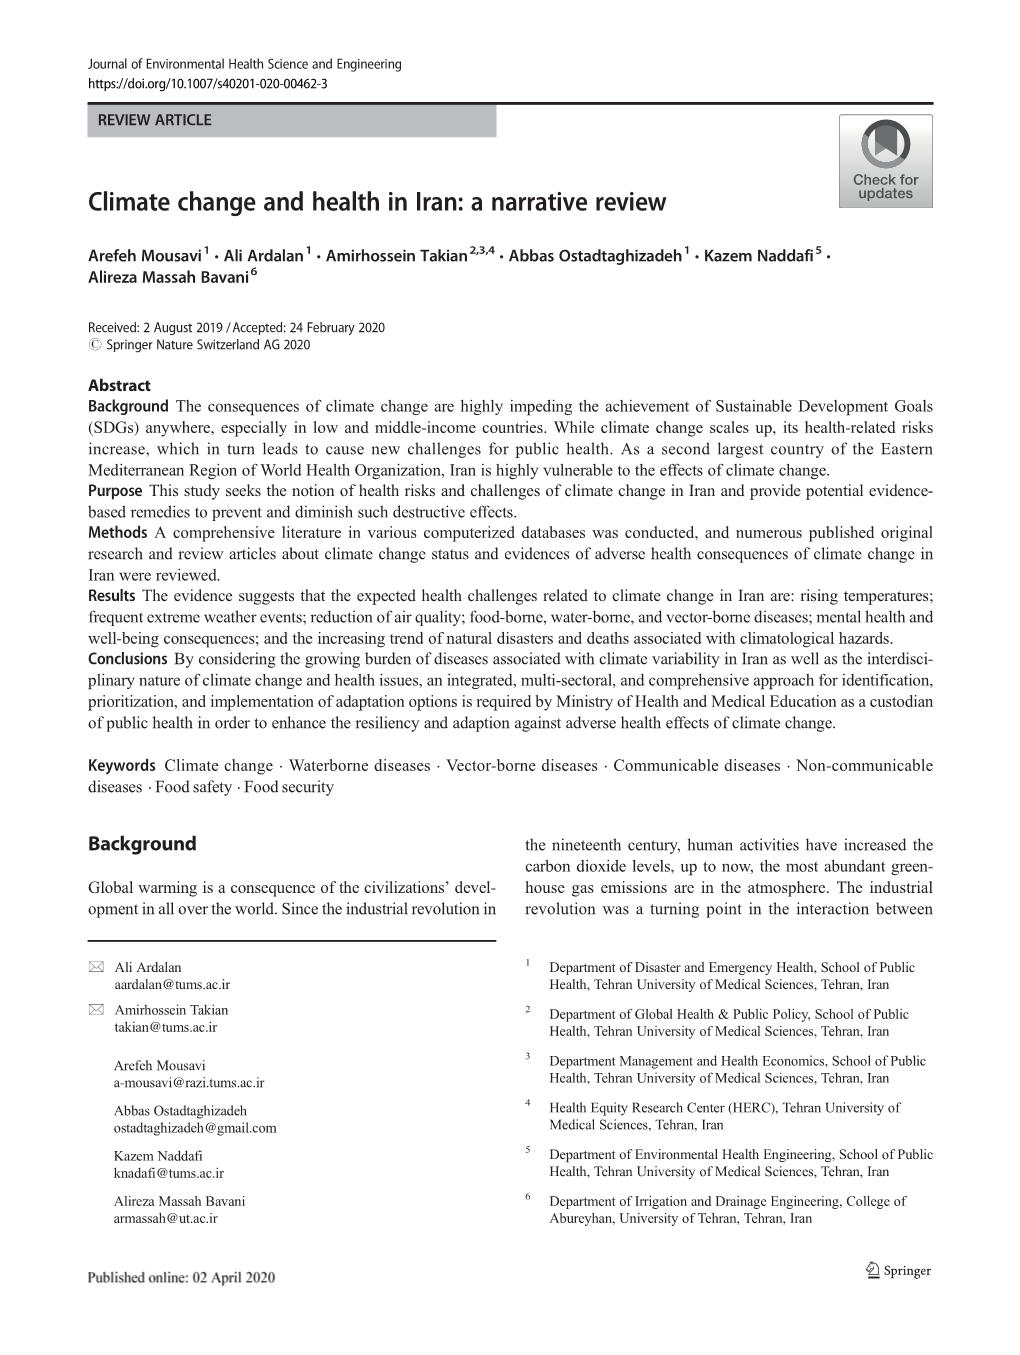 Climate Change and Health in Iran: a Narrative Review